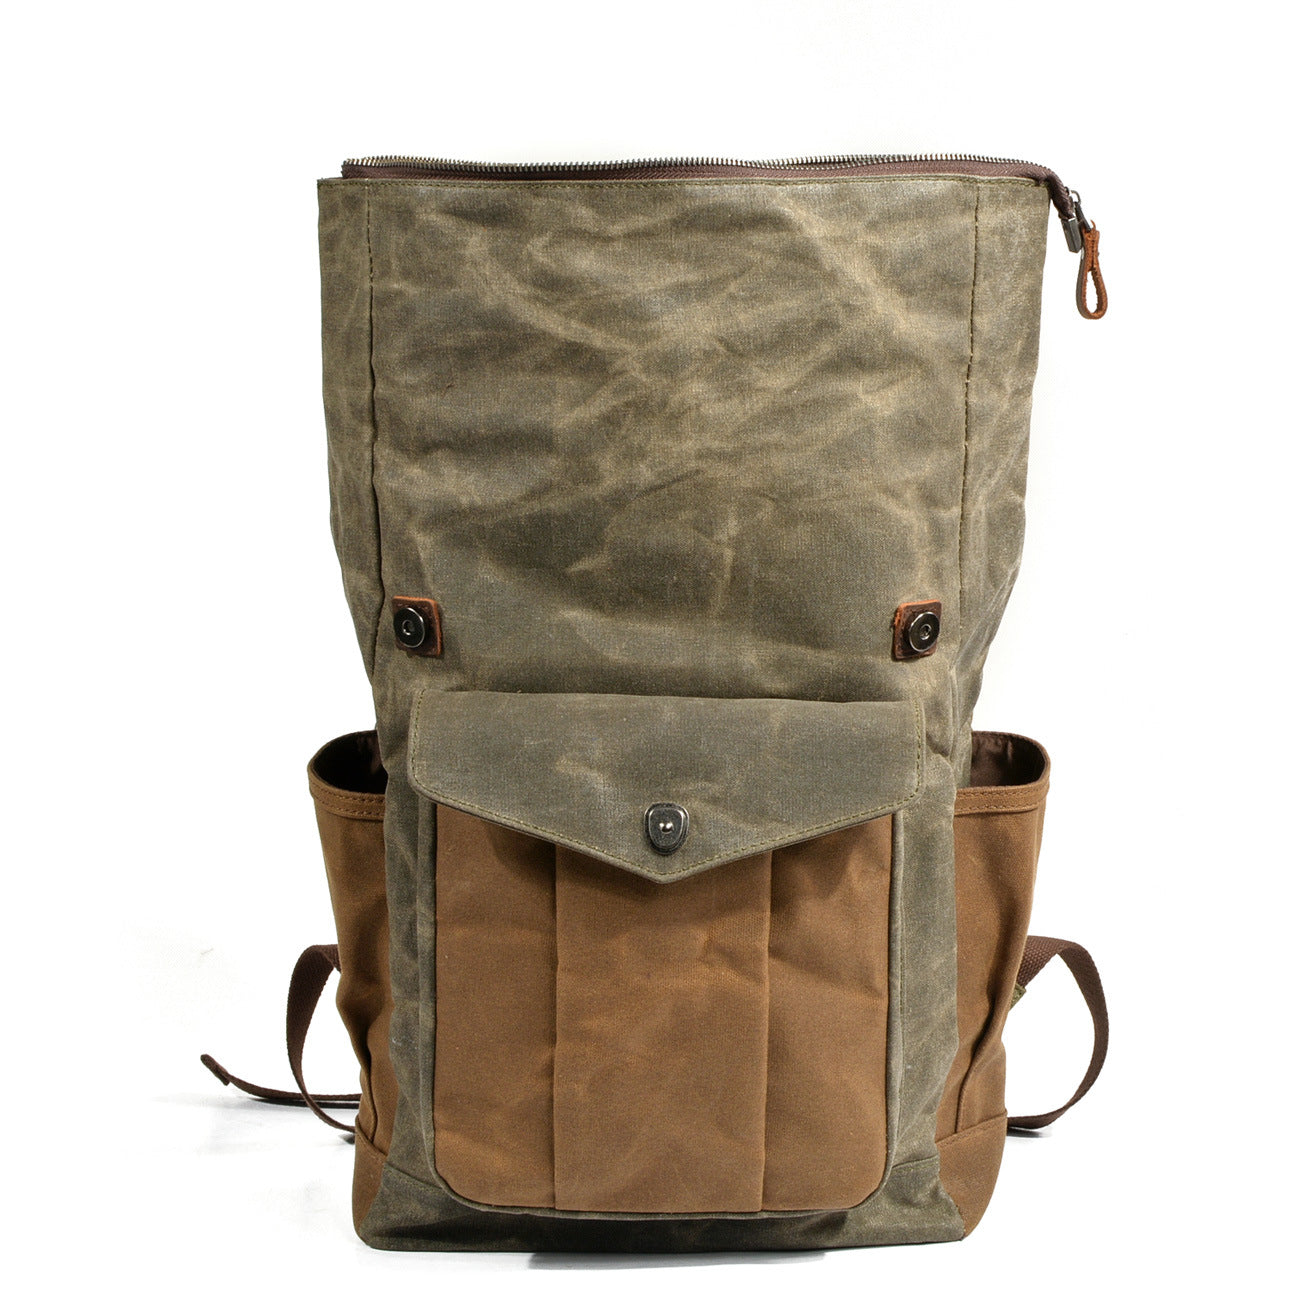 Leather Hiking Outdoor Canvas Backpack-Leather Canvas Backpack-Dark Gray-Free Shipping Leatheretro